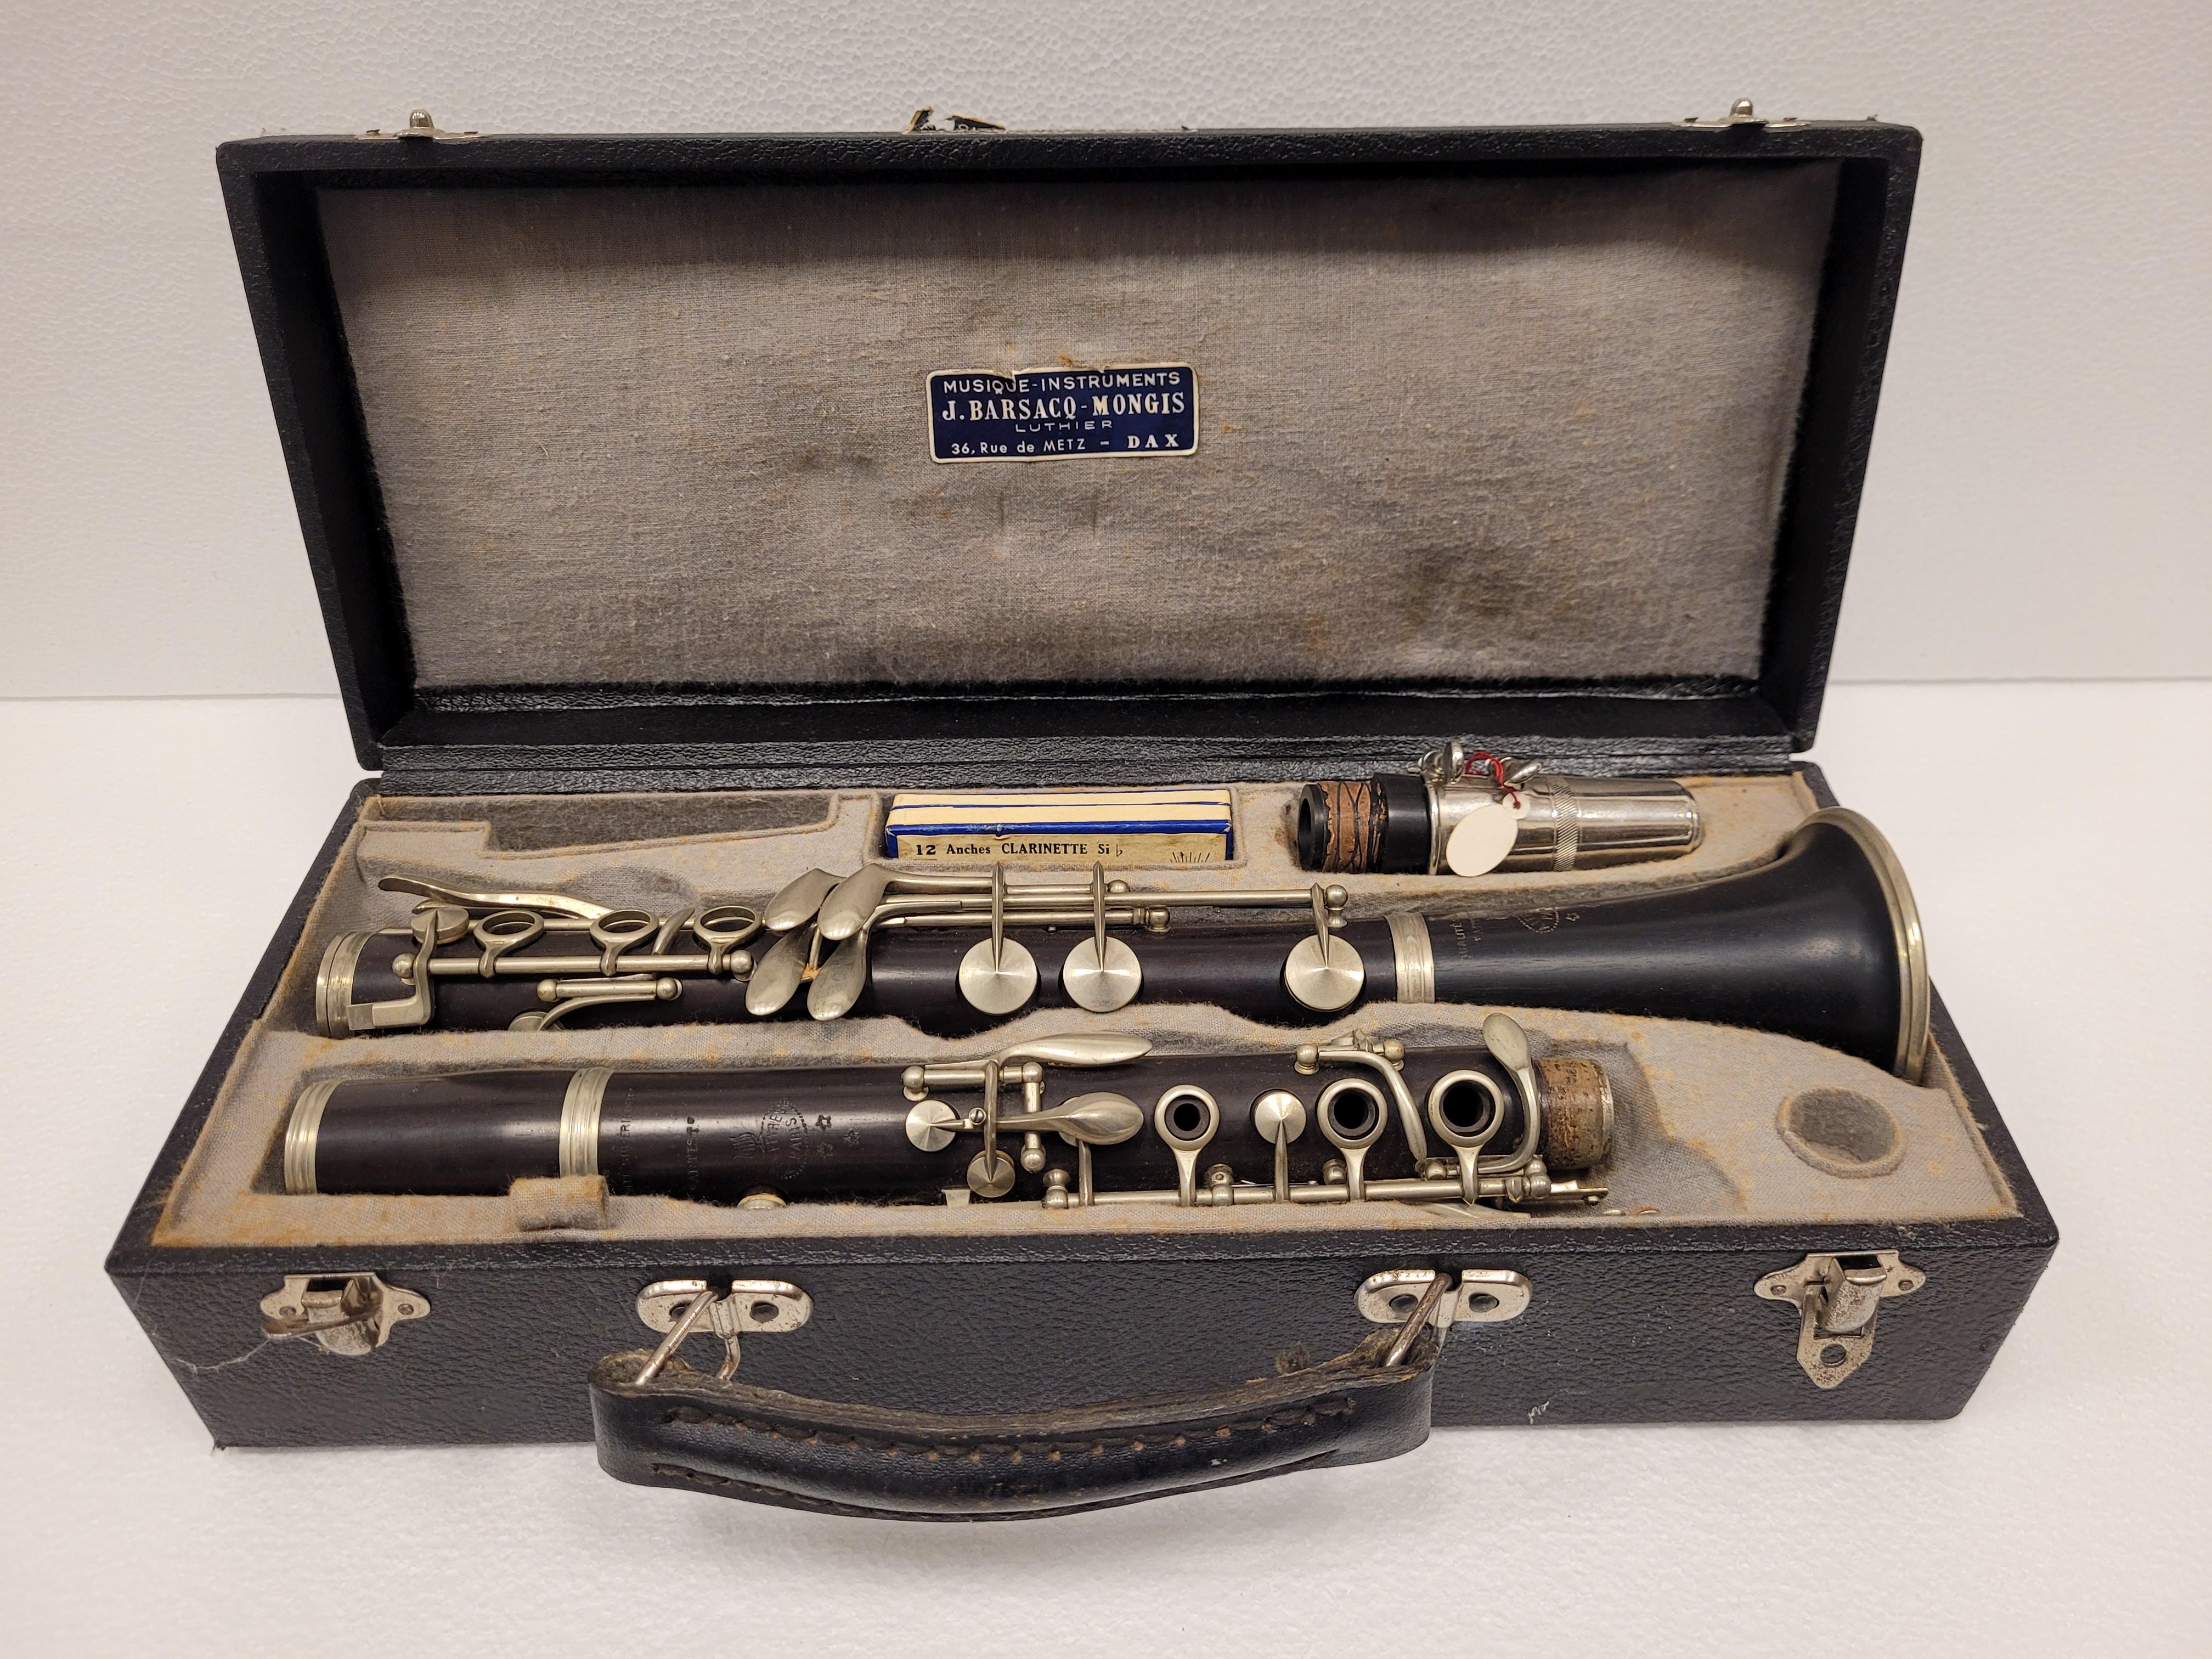 Magnificent clarinet from the French company Lefêvre, based in Paris since the 19th century. Black clarinet in B flat. Includes empty box of 12 clarinet reeds in B flat from the French brand Selecta Extra Supérieure. The instrument is fully